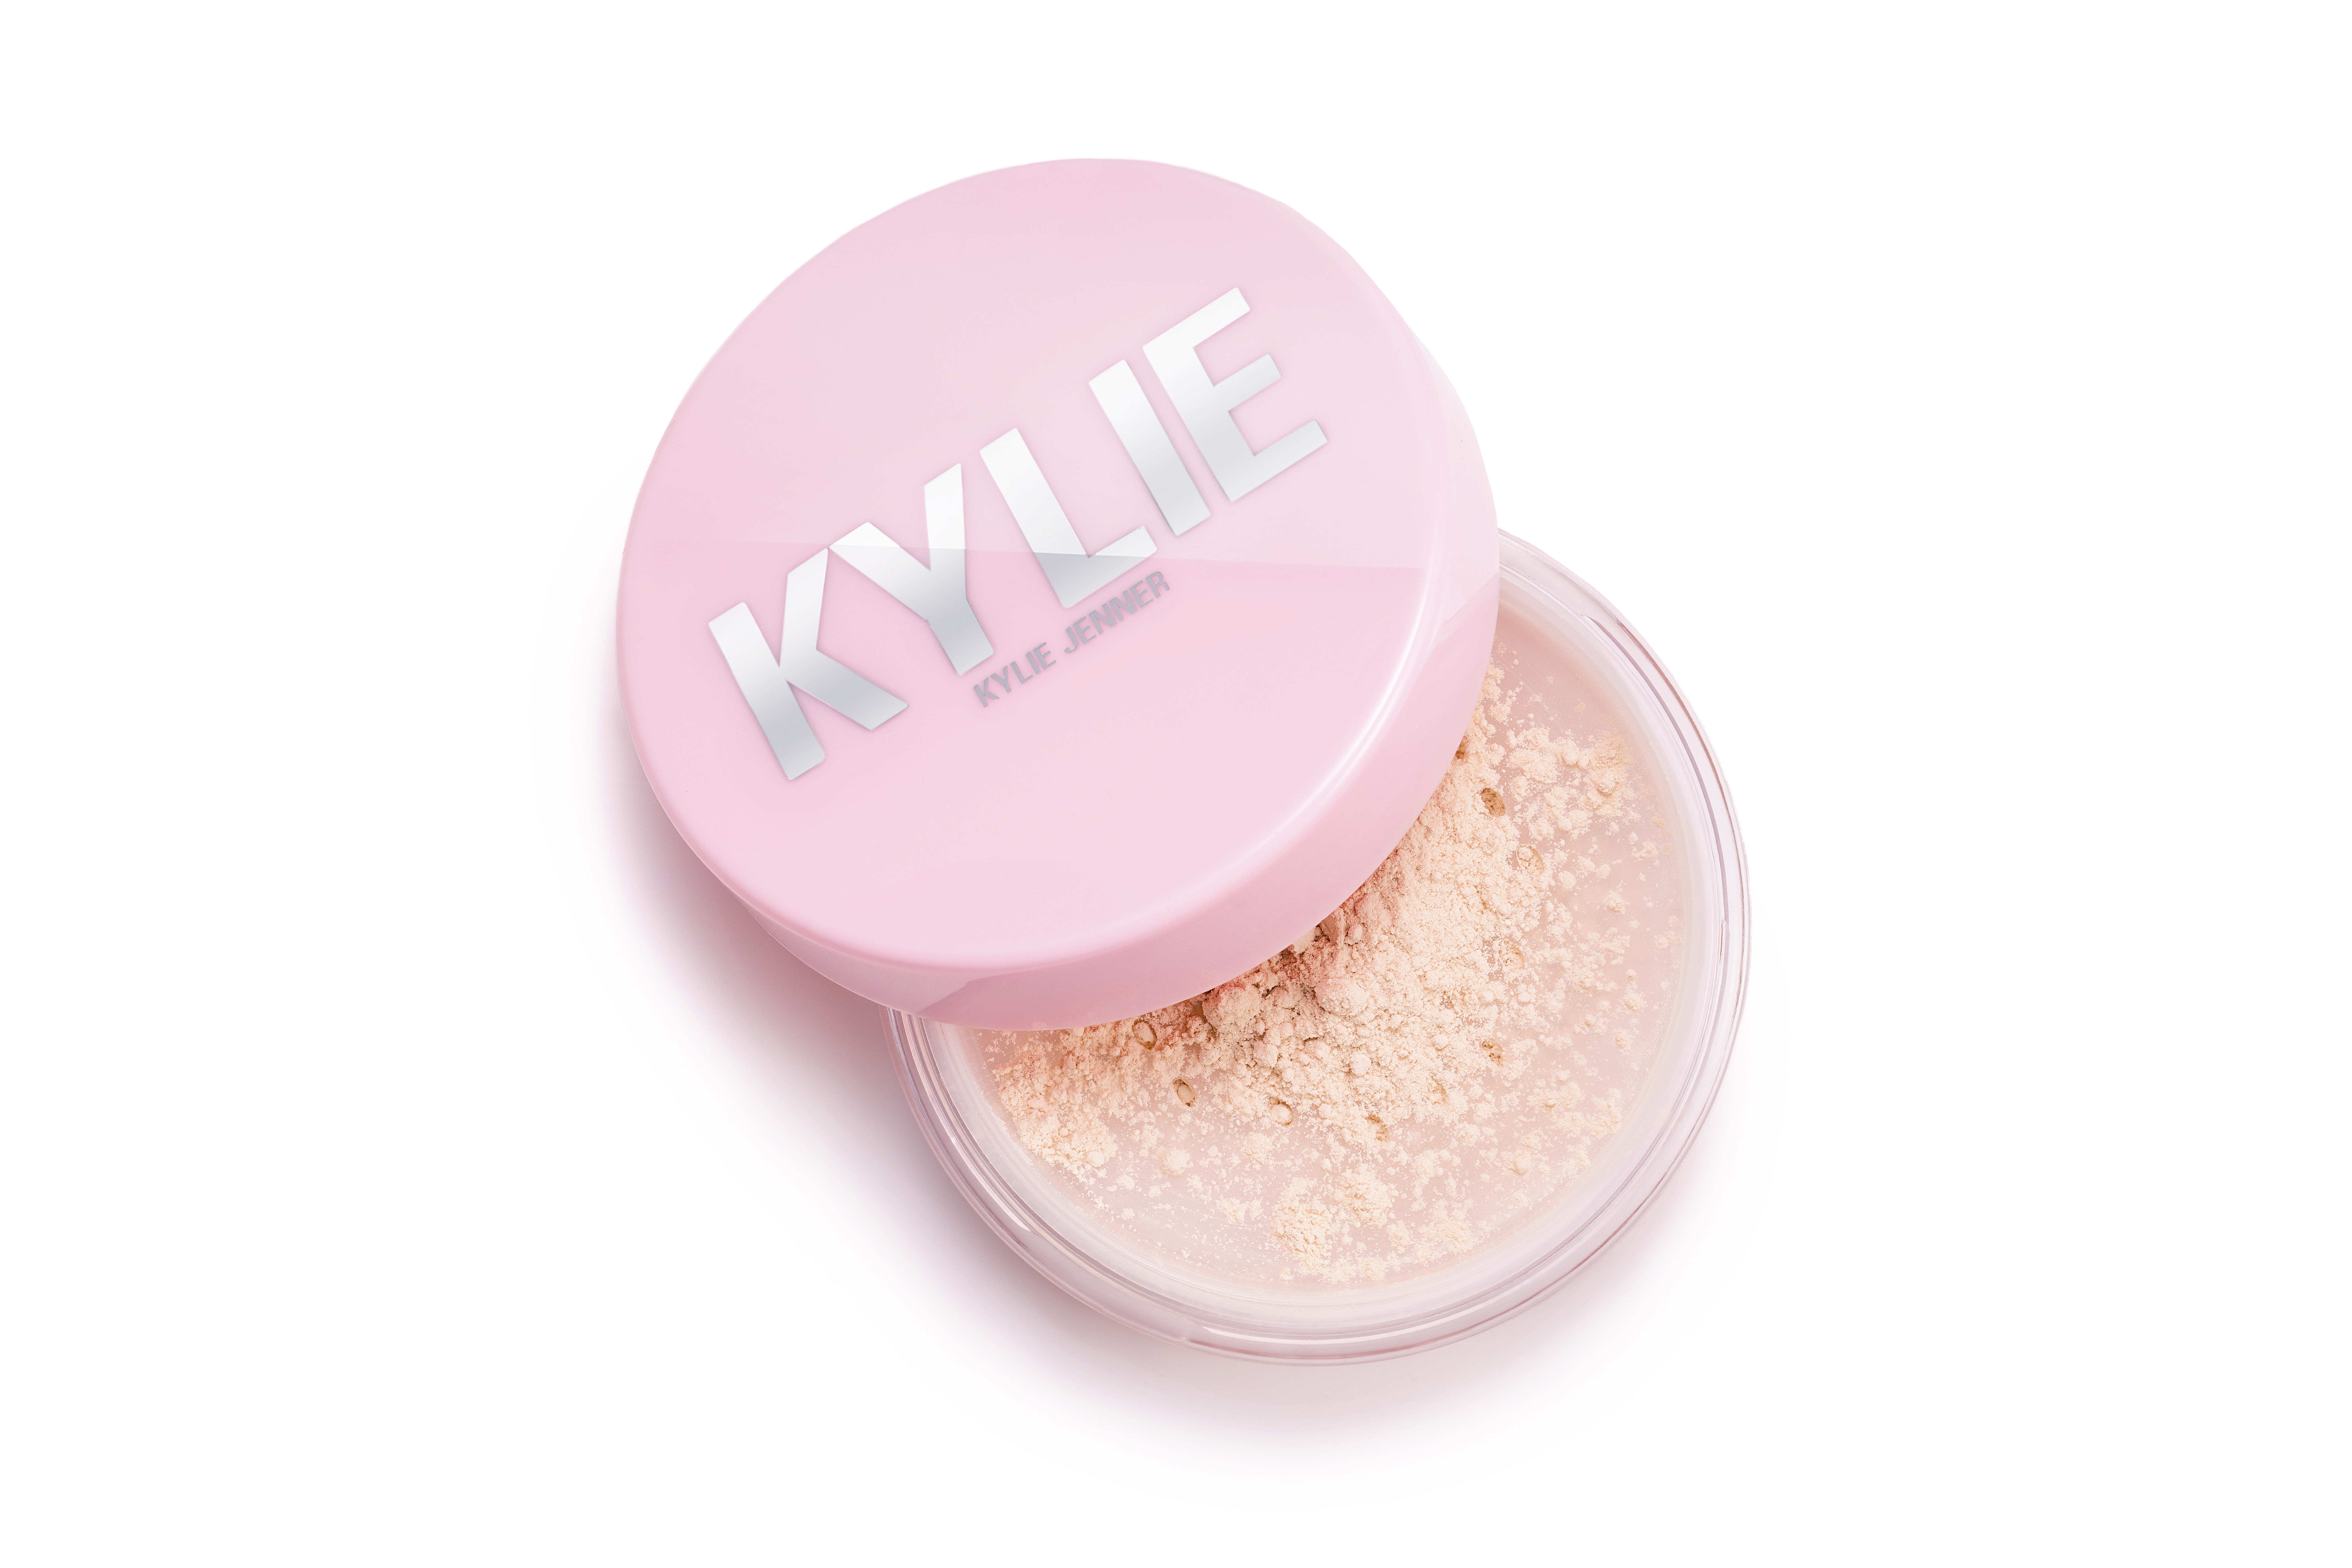 Kylie Jenner Launchest Kylie Cosmetics Setting Powder Makeup Lipgloss Release Date